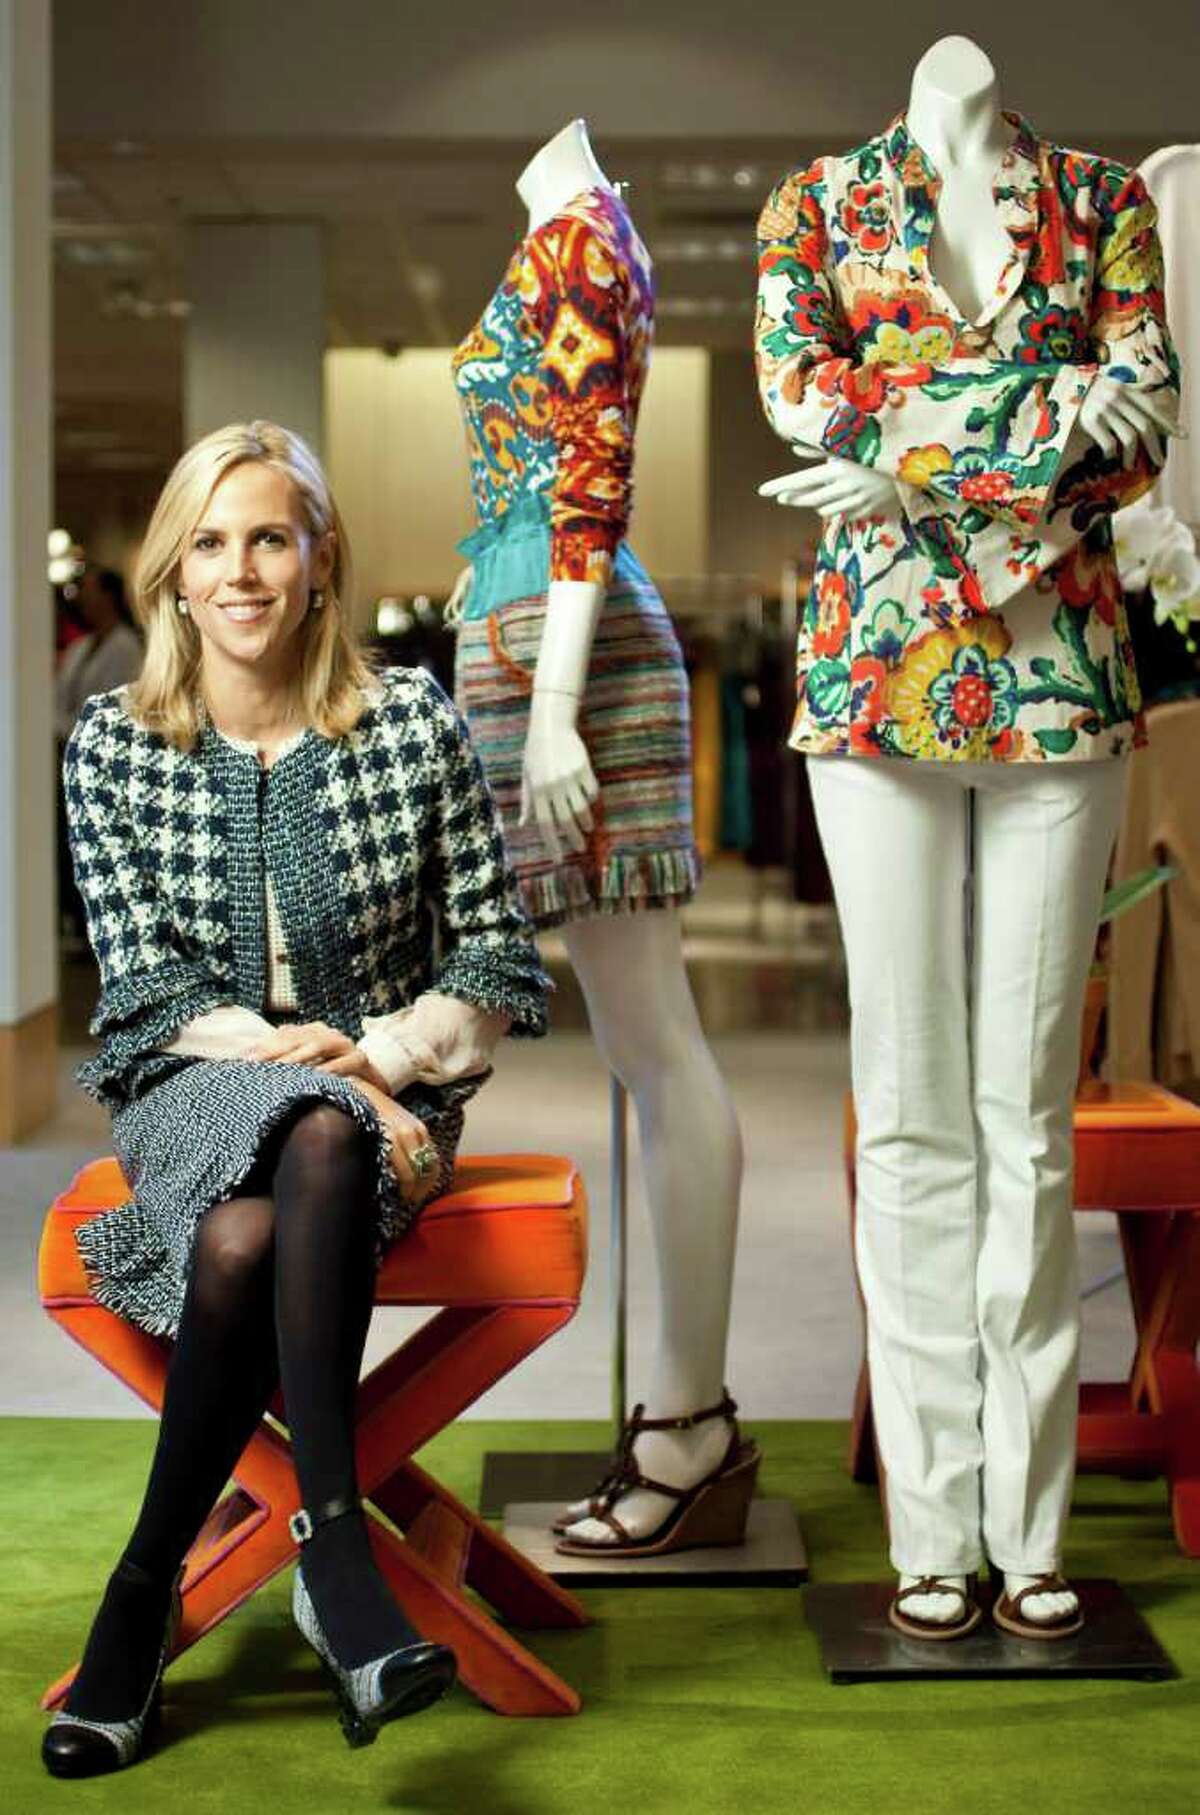 Tory Burch resonates with us